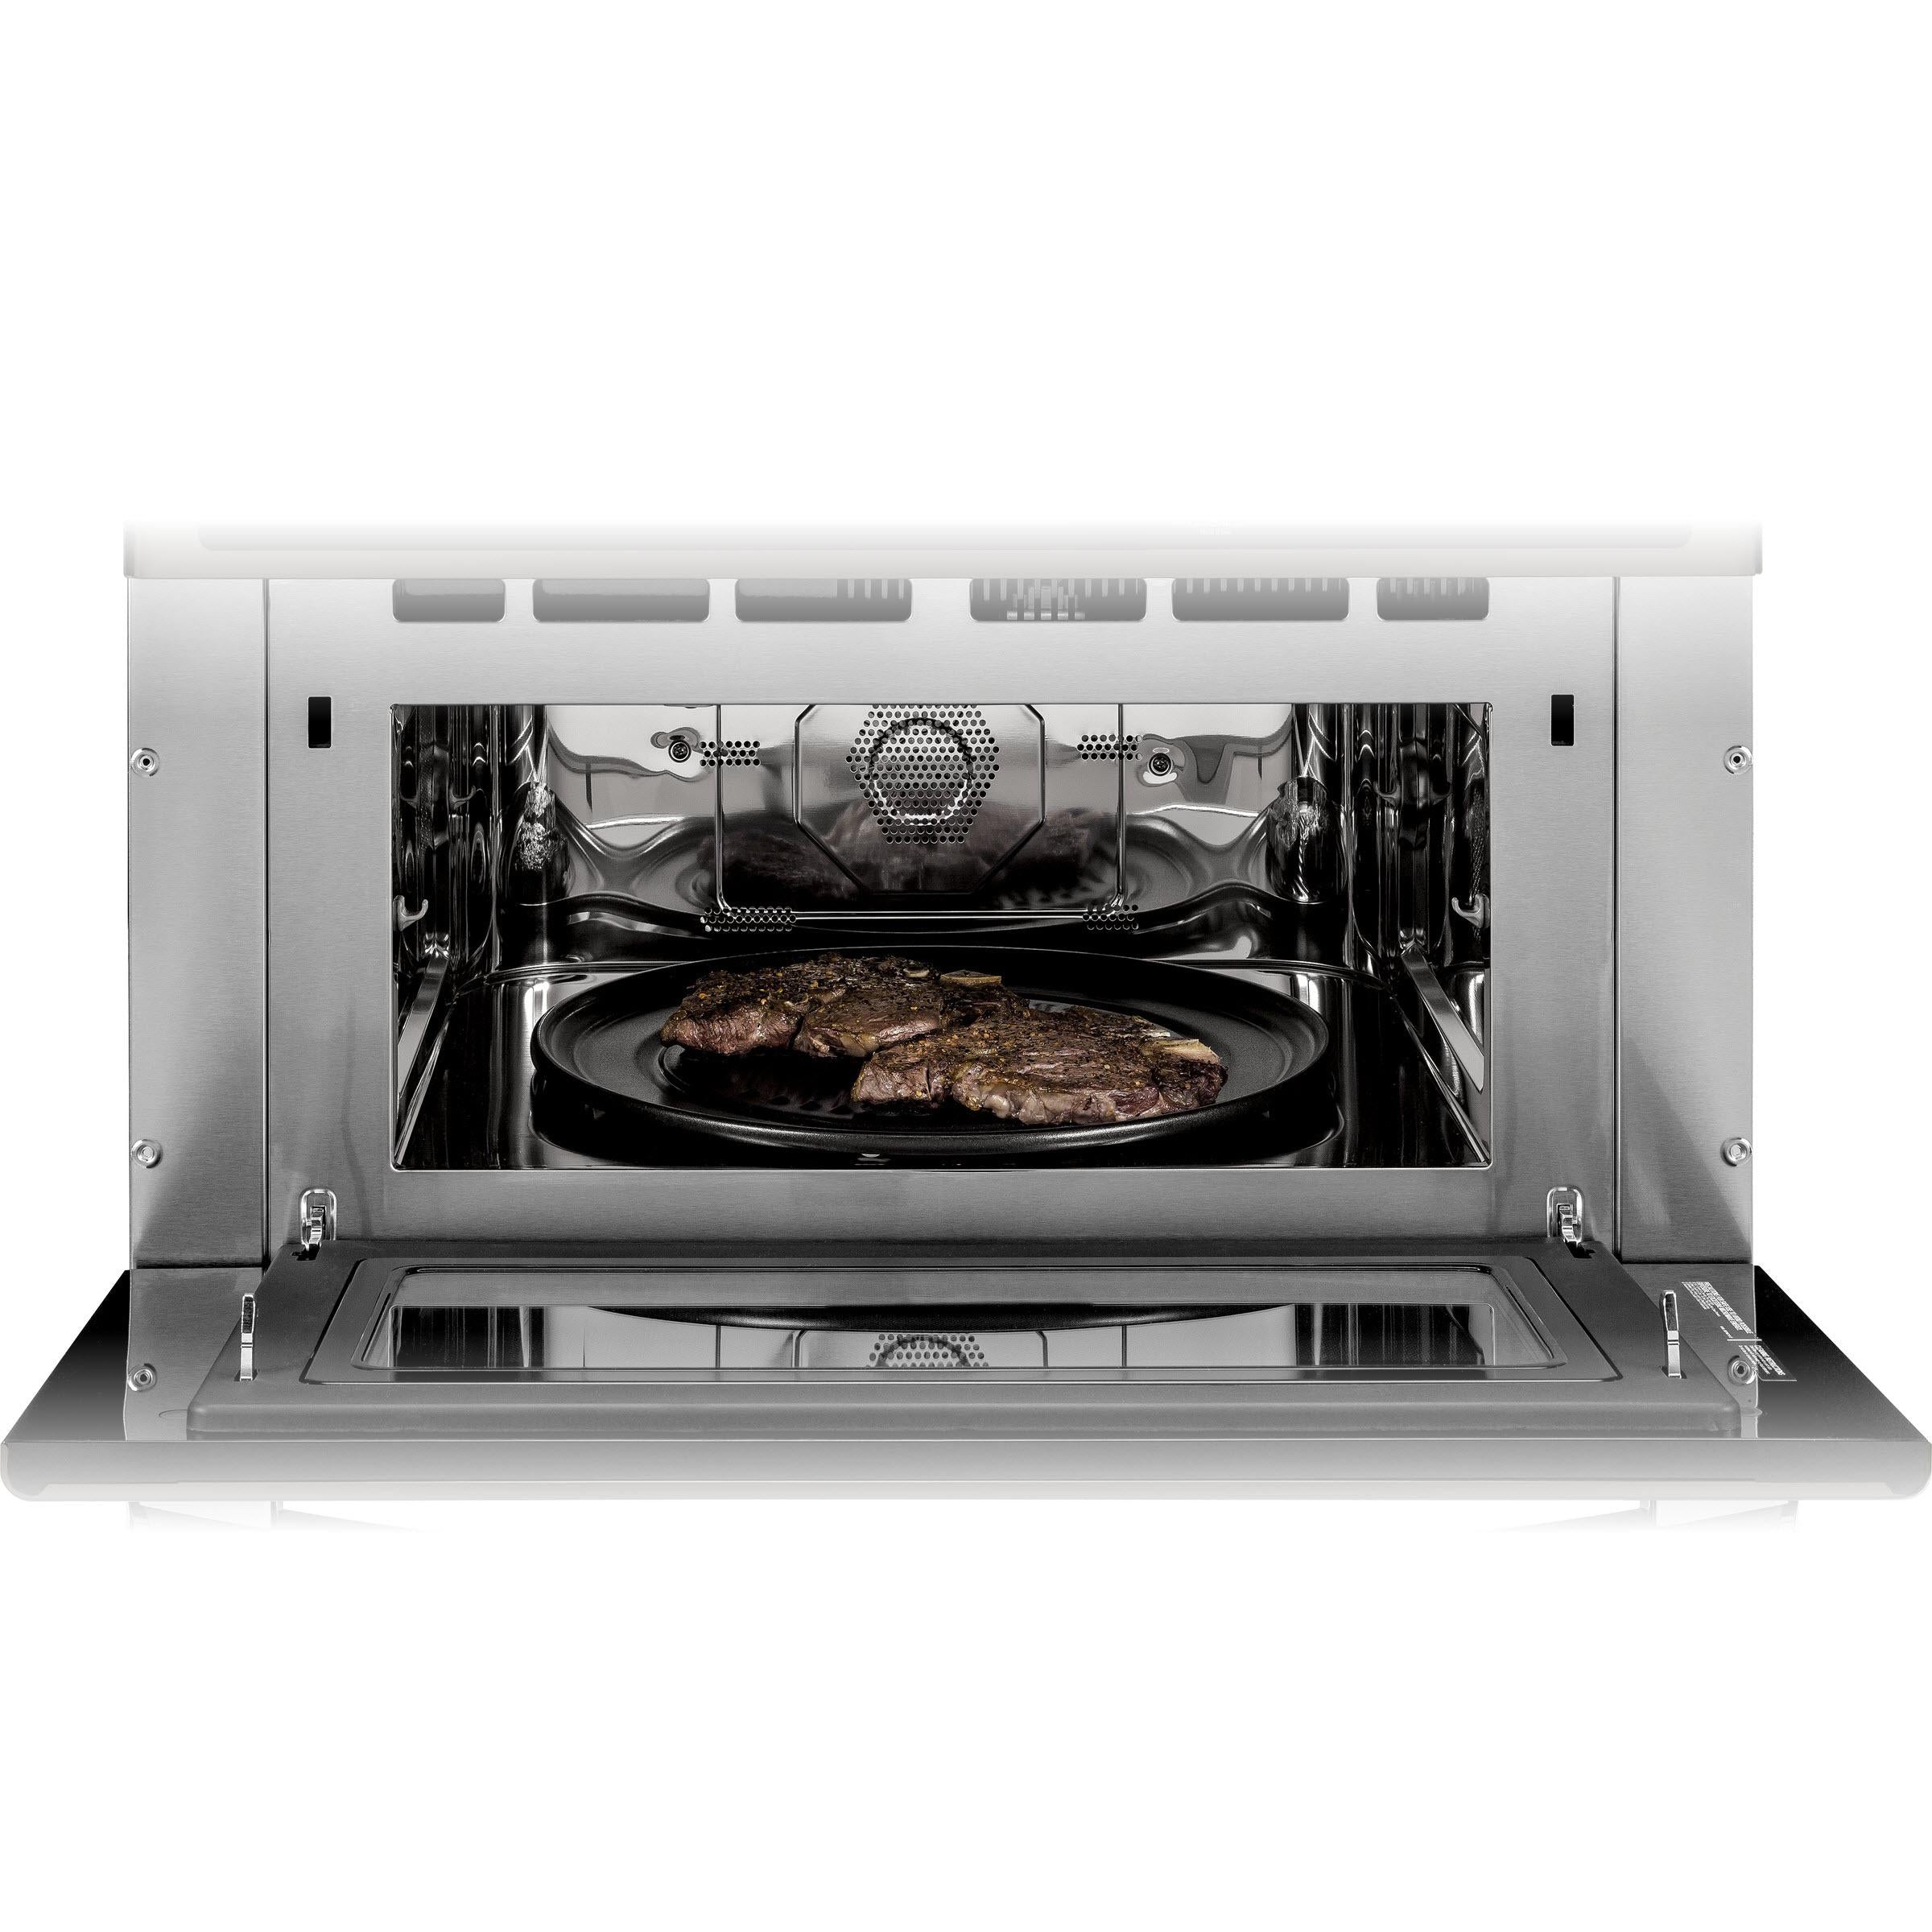 GE Profile 30-inch, 1.7 cu. ft. Built-In Microwave Oven with Convection PSB9120BLTS